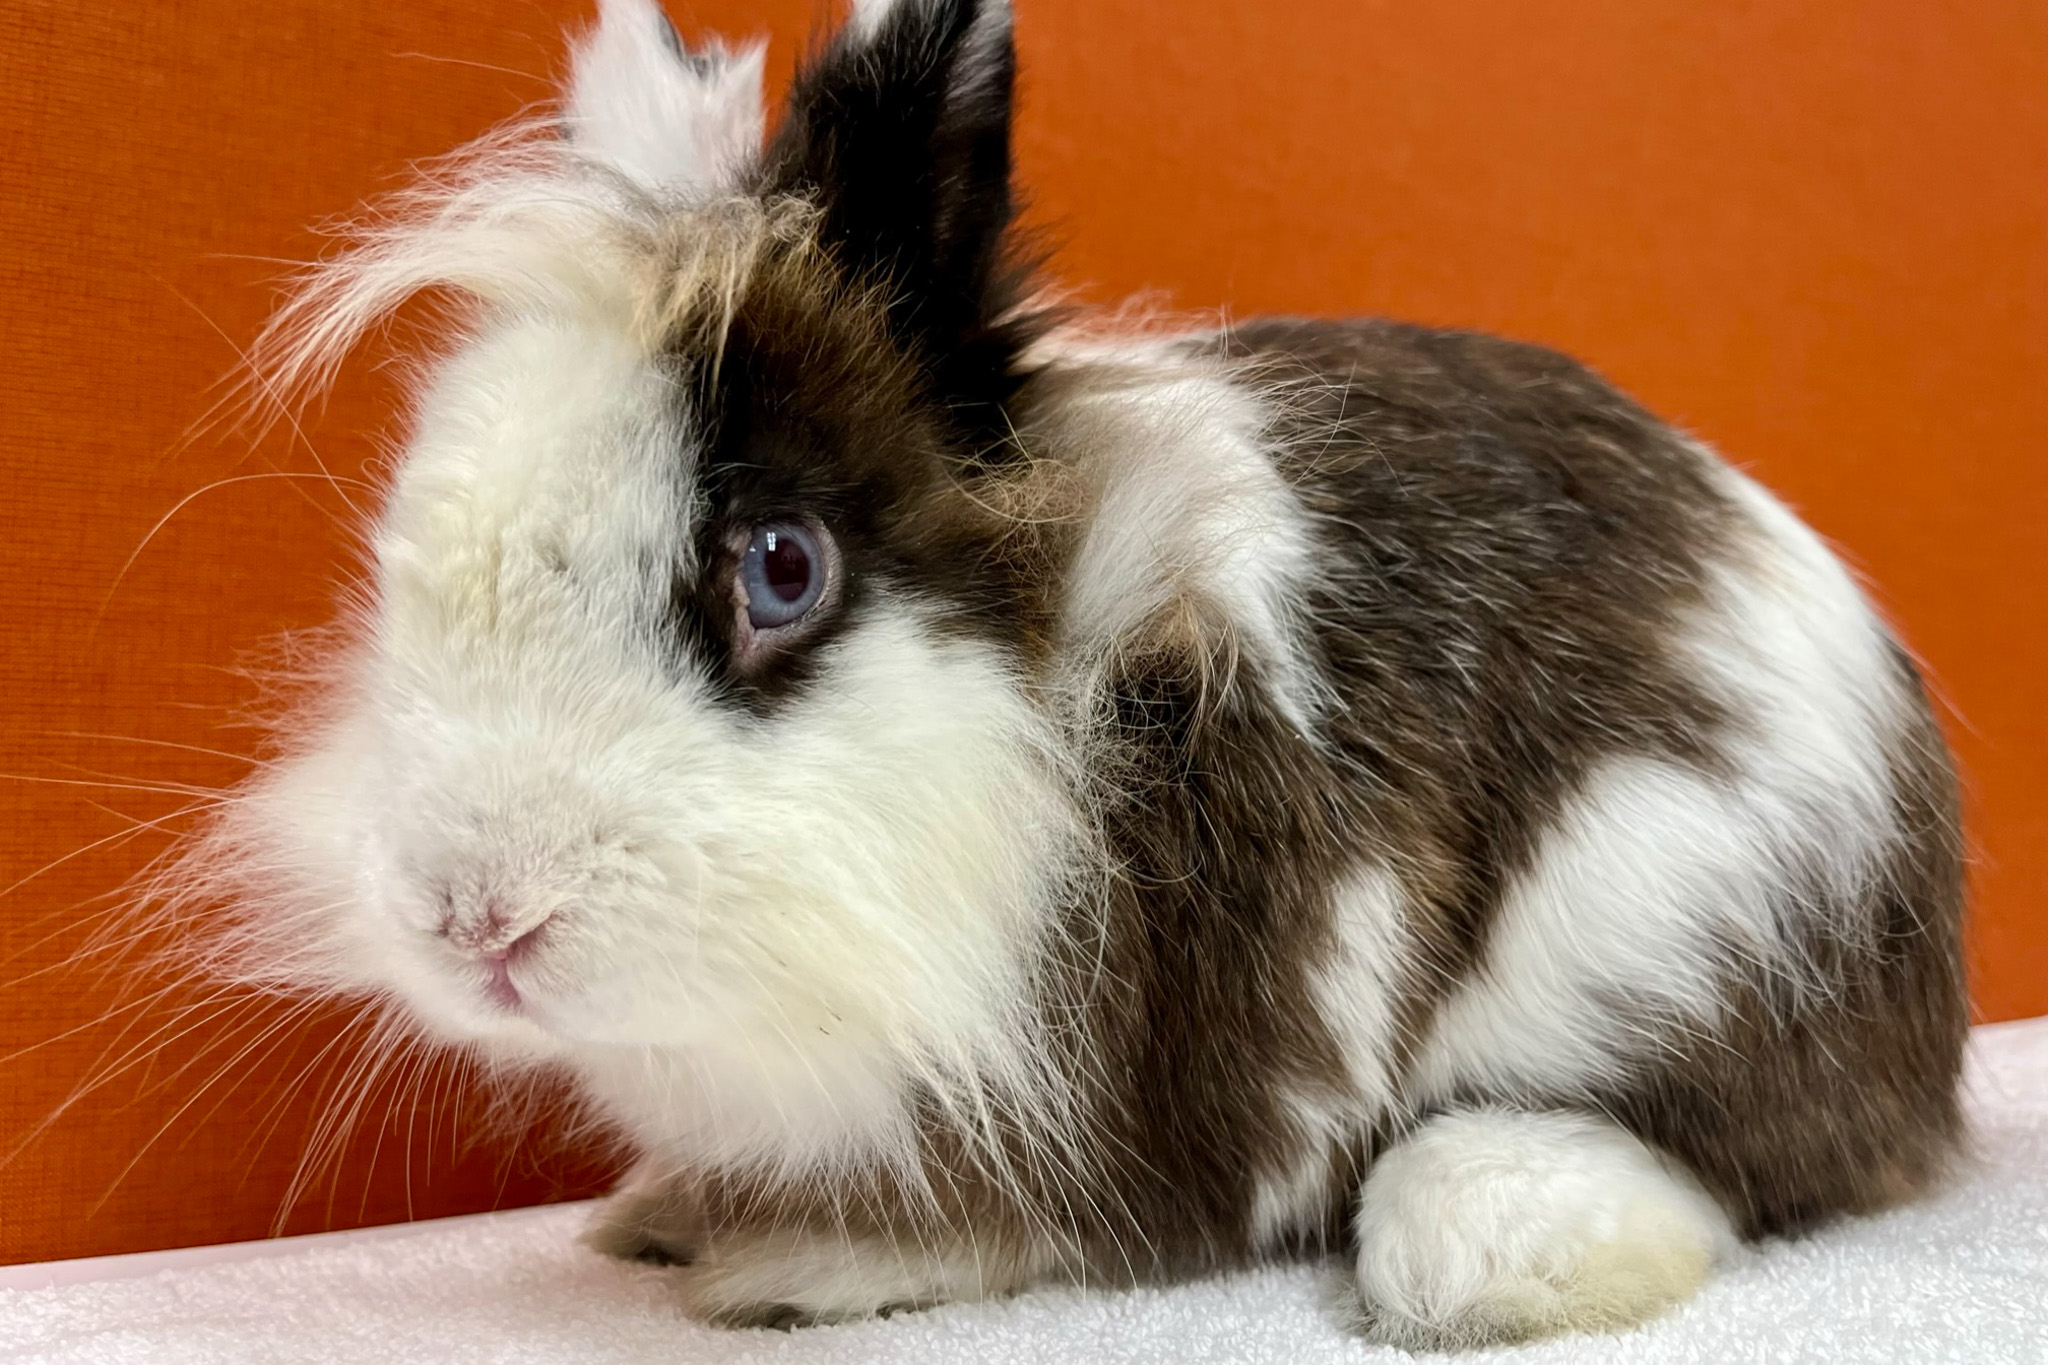 Hop On Over: SF Animal Shelter Filled to Brim With Bunnies, Dogs